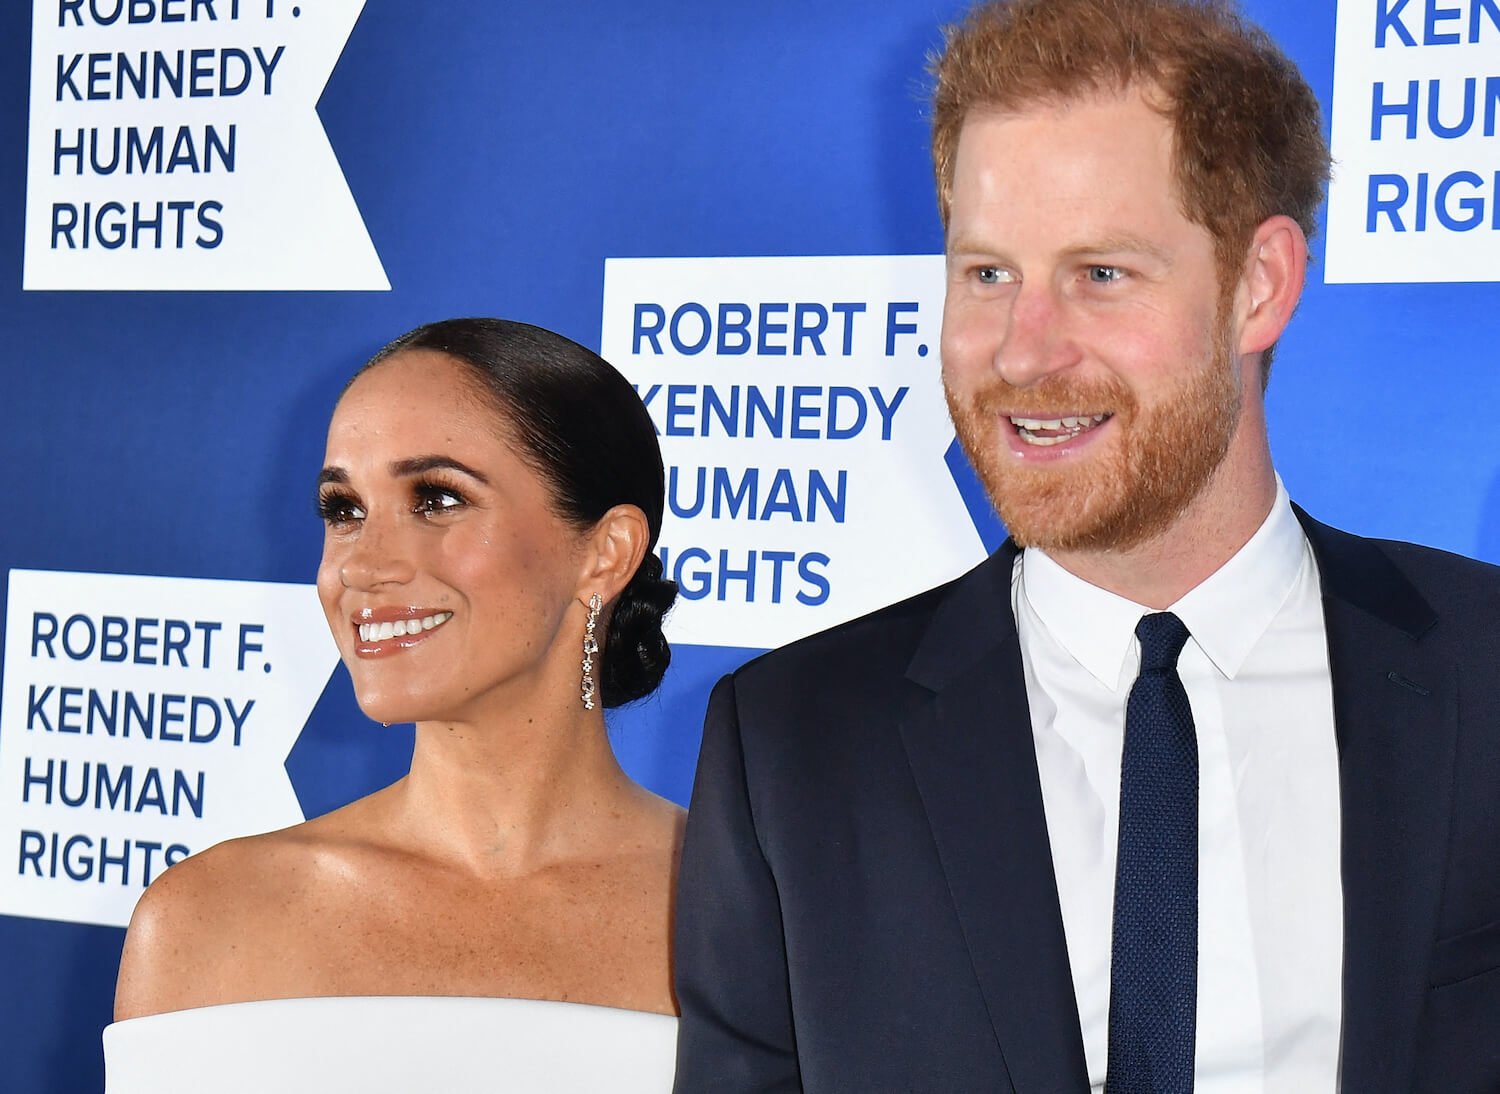 Prince Harry wears a dark suit and smile and smiles beside Meghan Markle wearing a white off the shoulder top and smiling